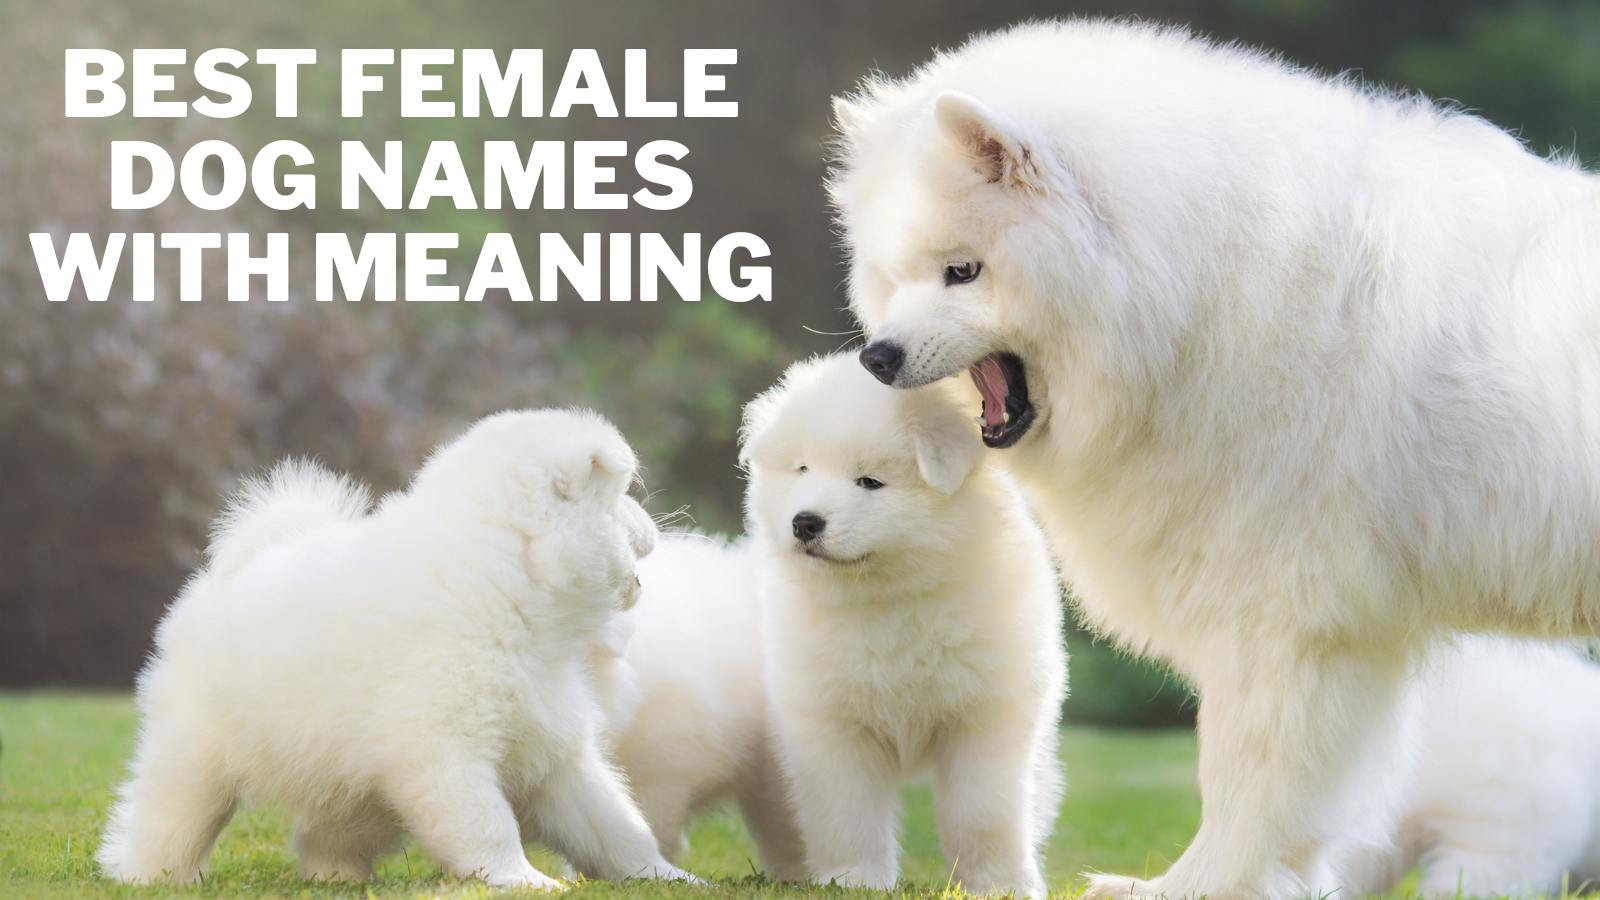 Best Female Dog Names With Meaning